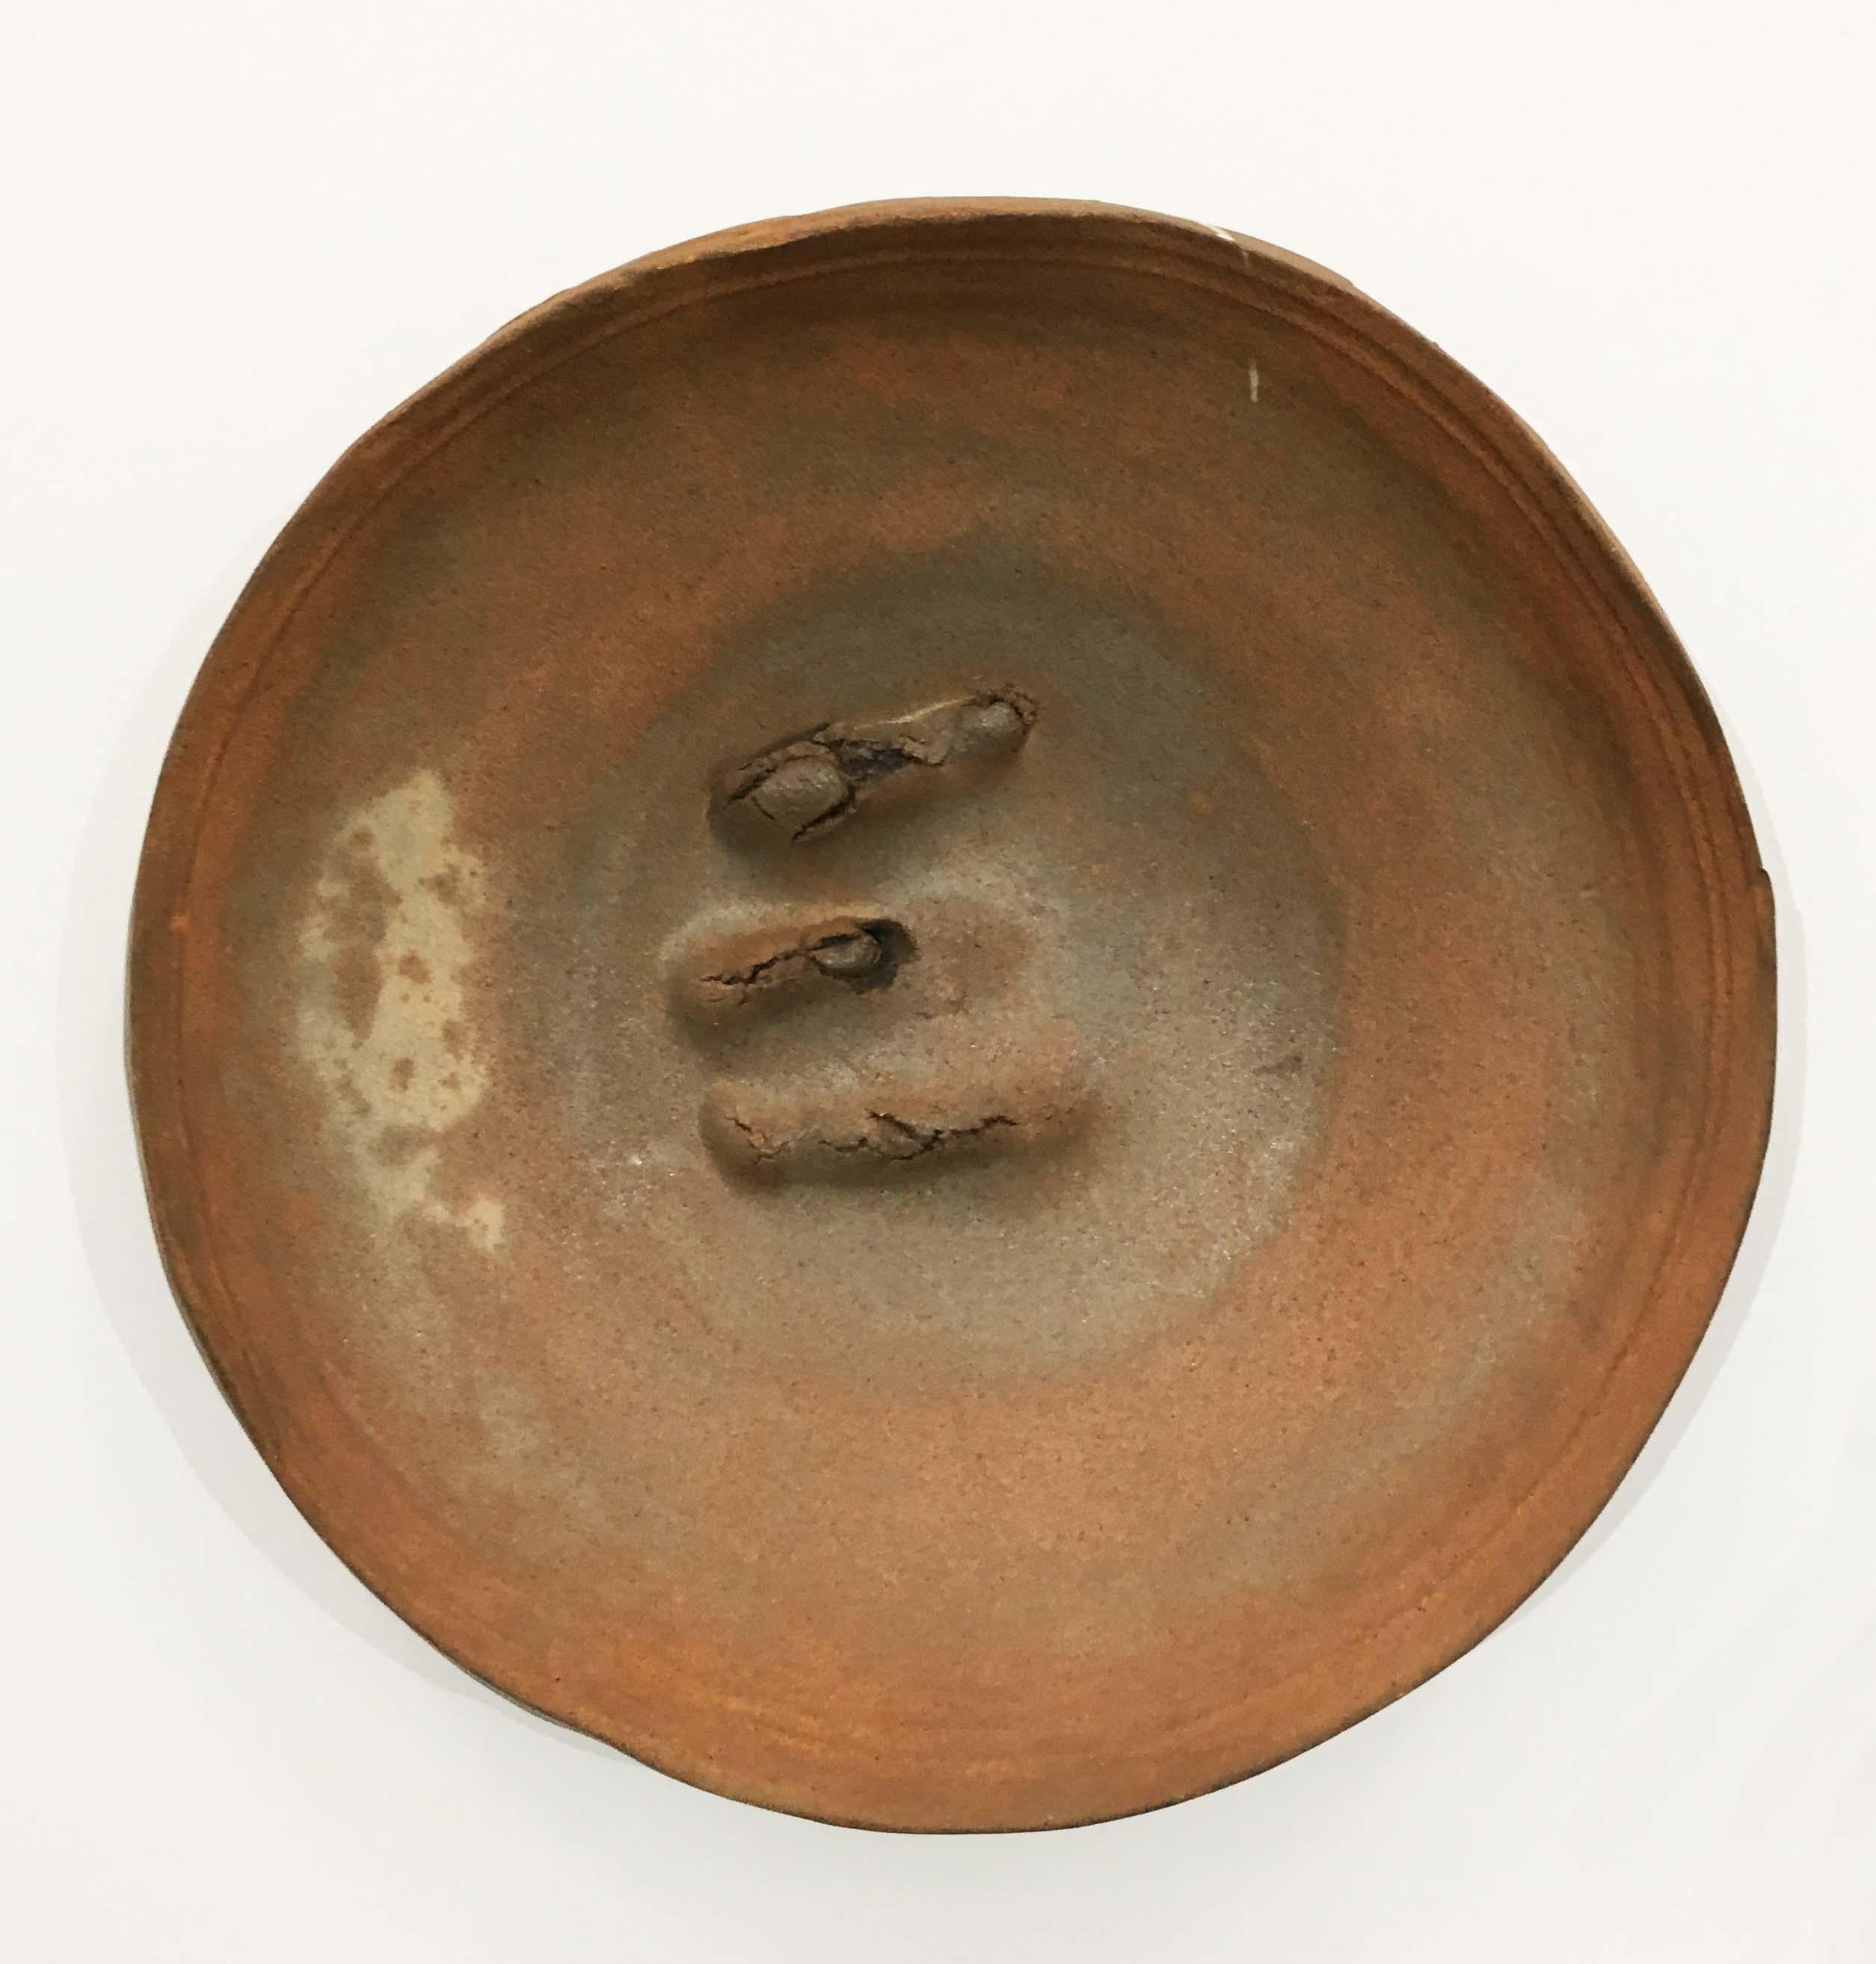 Peter Voulkos Abstract Sculpture - Untitled Gas-Fired Ceramic Plate (California Clay / American Clay Revolution)